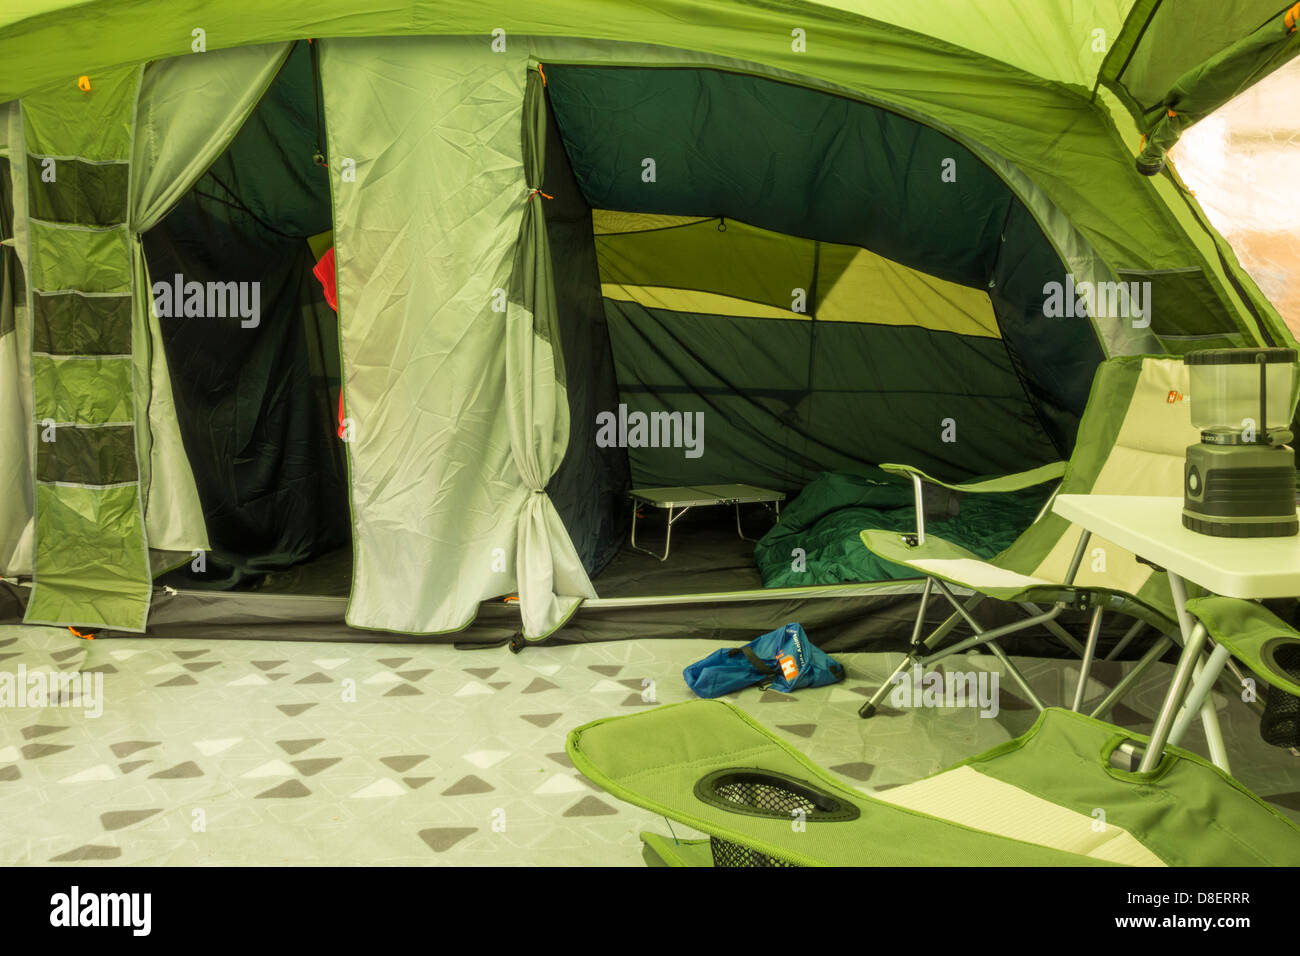 Tent display at Go Outdoors store, England, UK Stock Photo